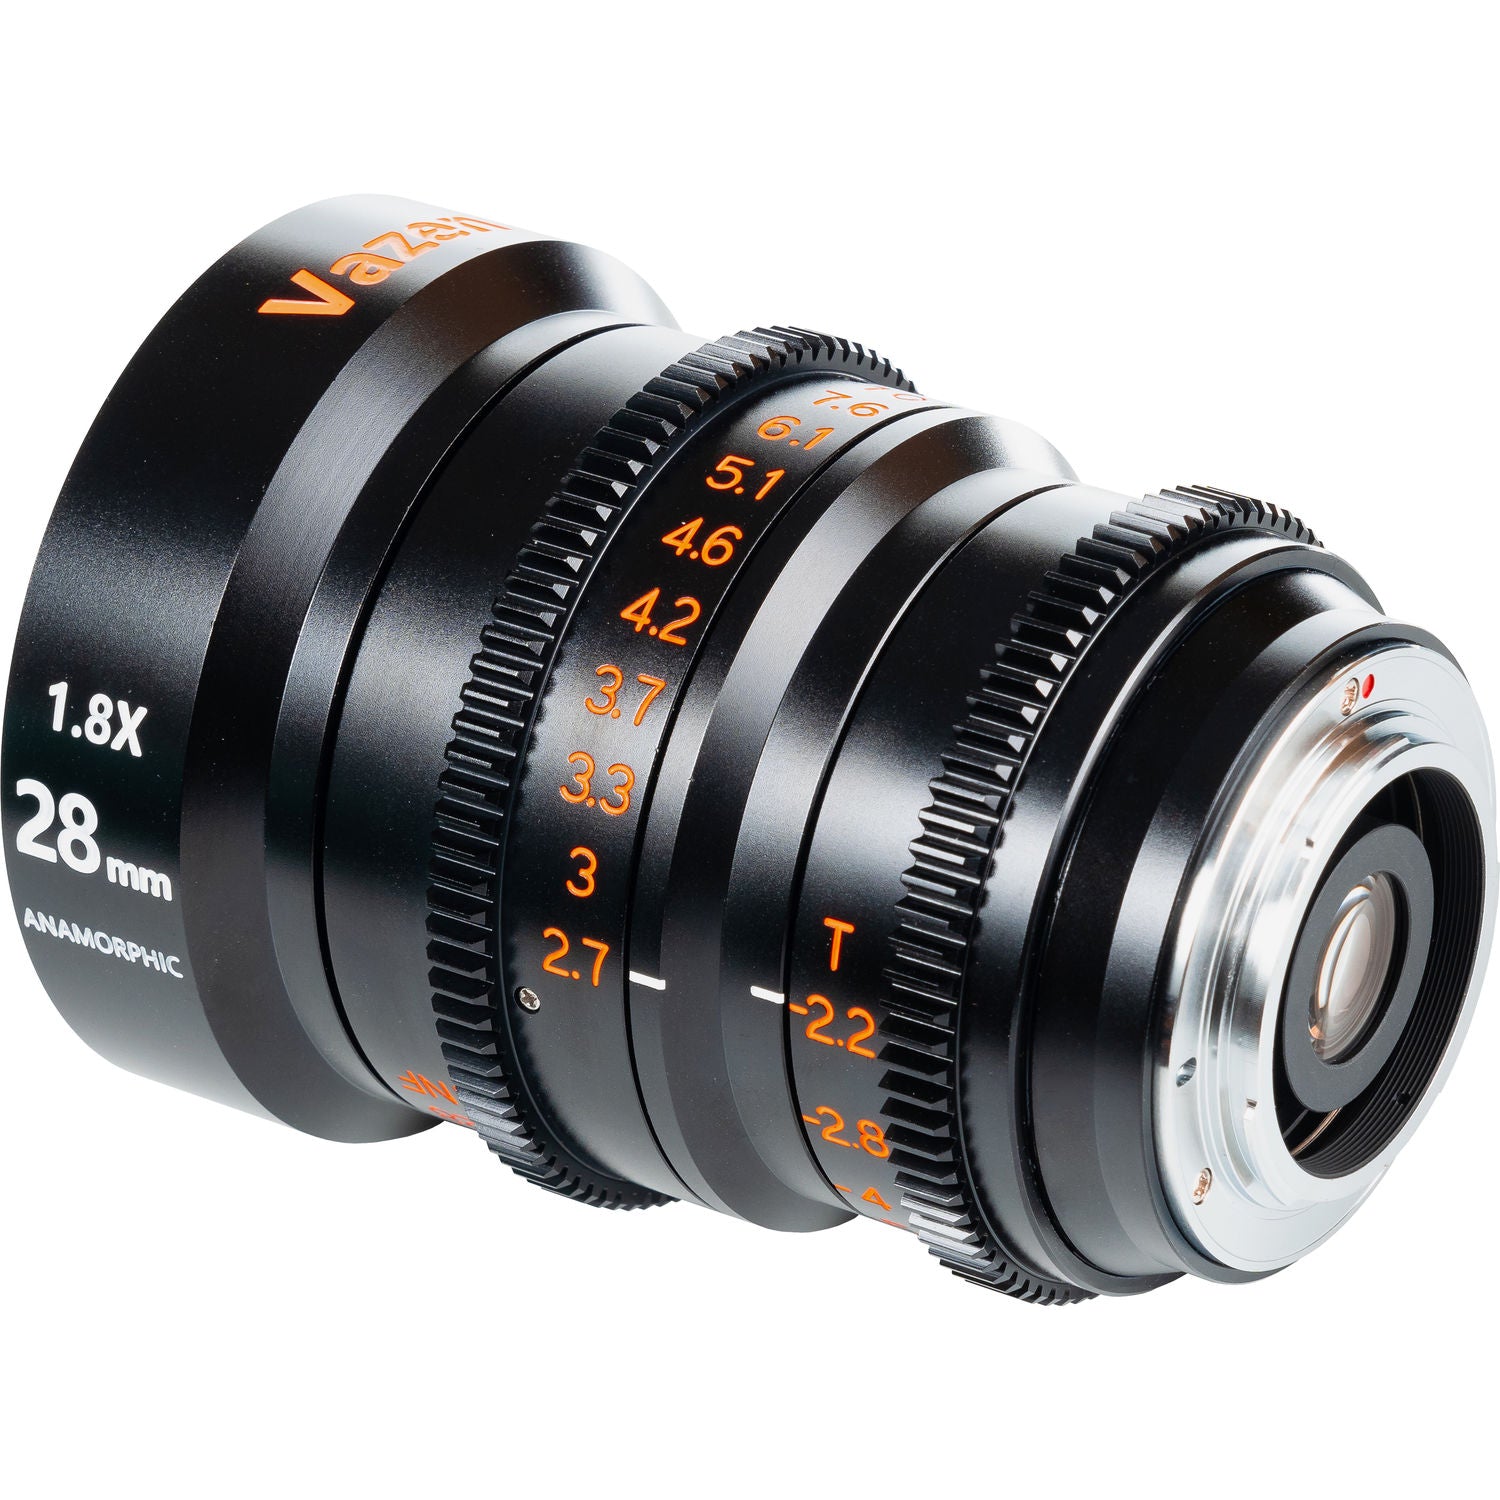 Vazen 28mm T/2.2 1.8X Anamorphic Lens for MFT Camera in a Back-Side View